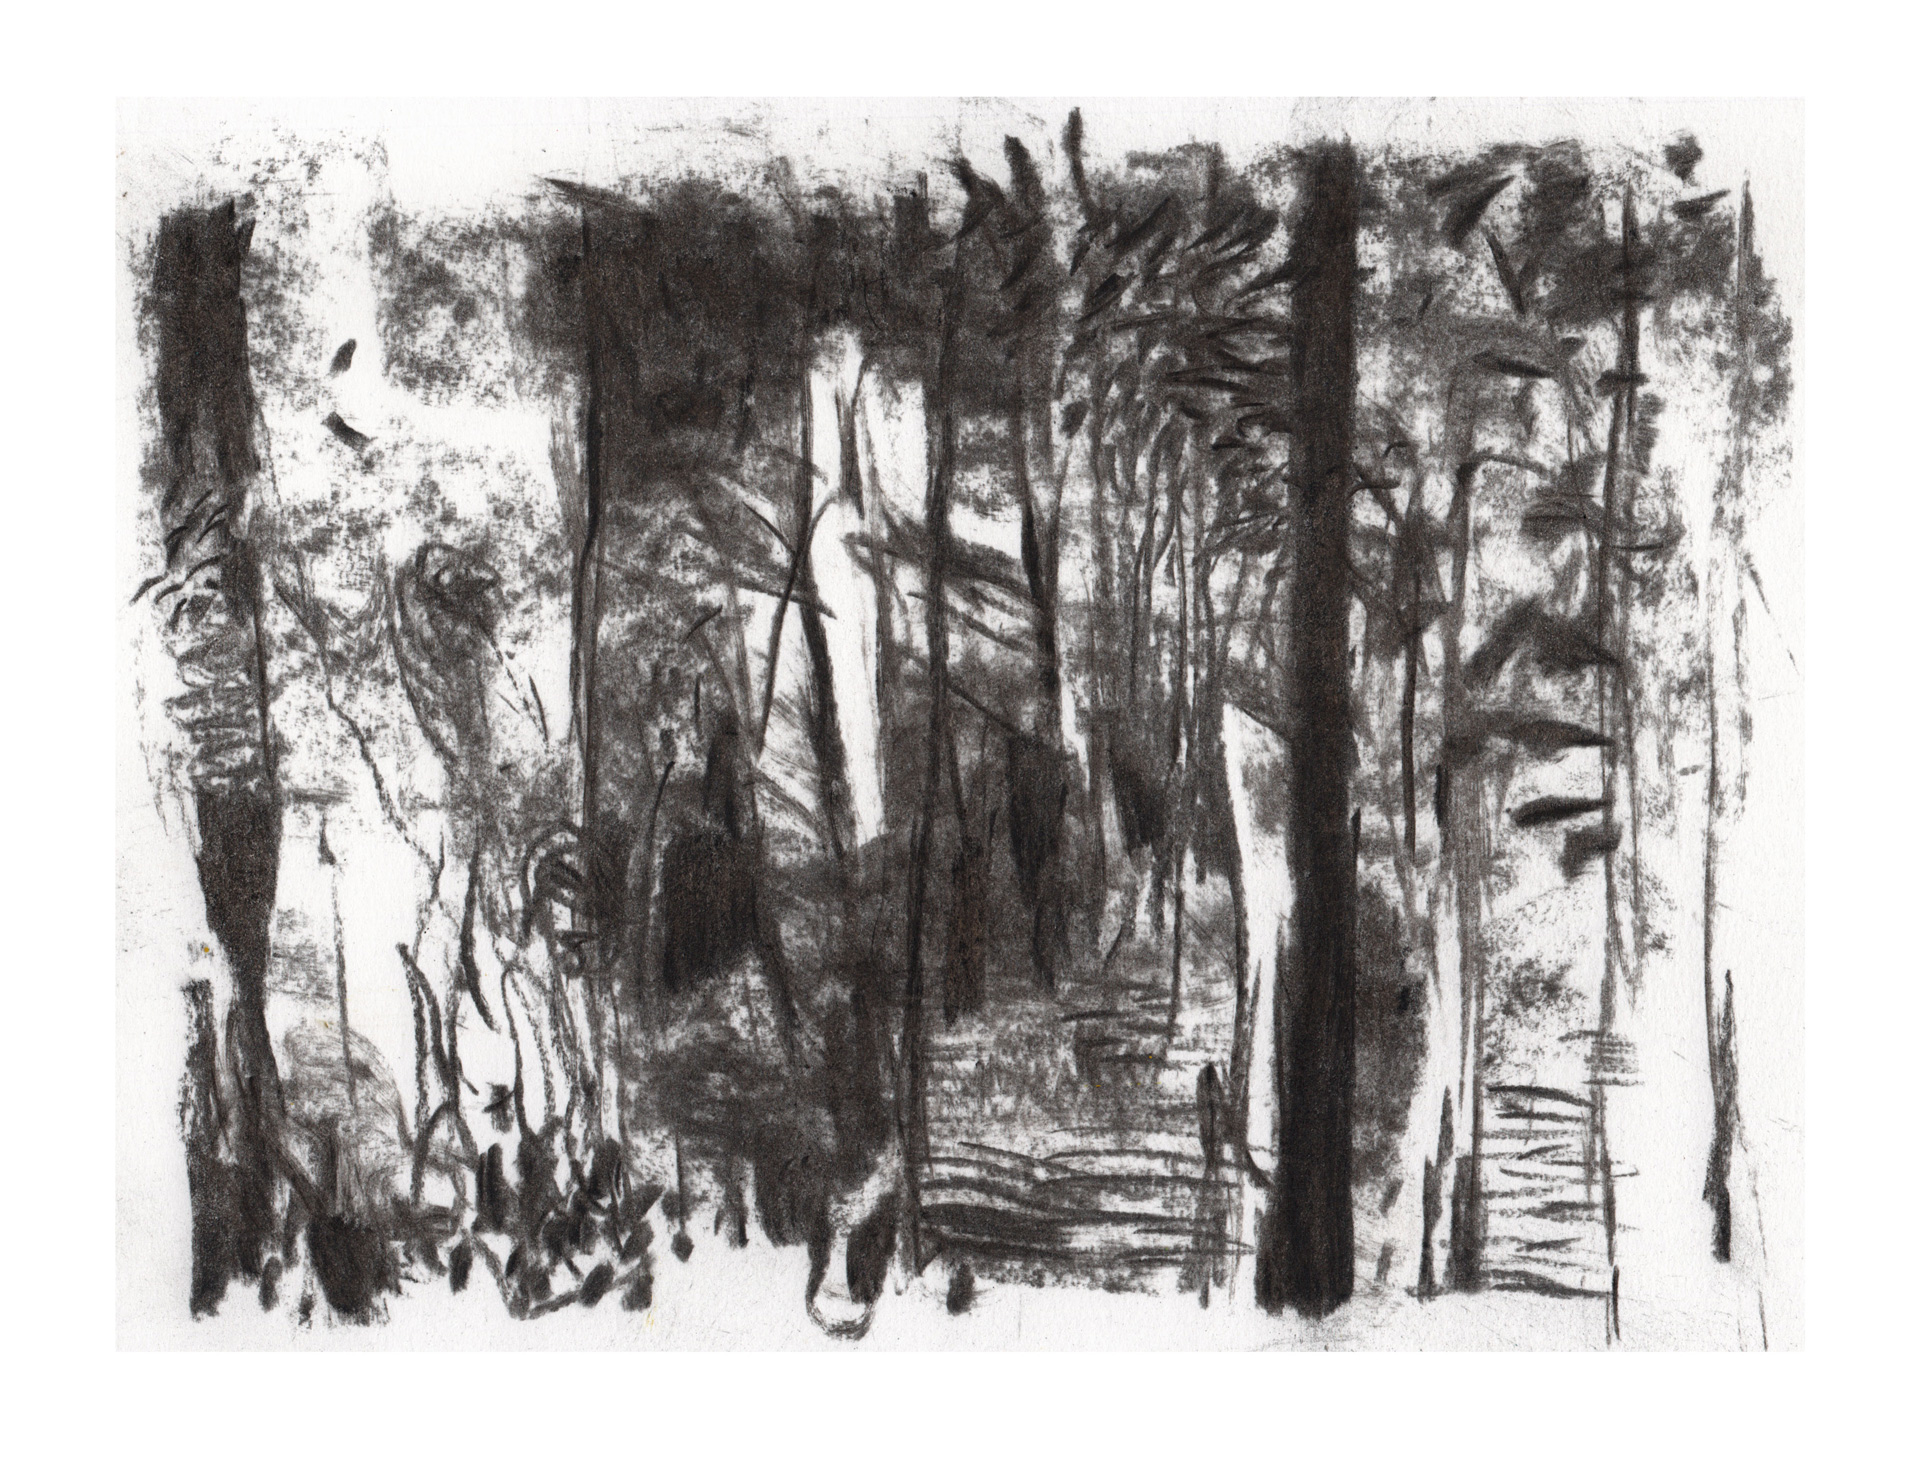 22. Ben Crappsley, Karri forest, charcoal on paper, $180